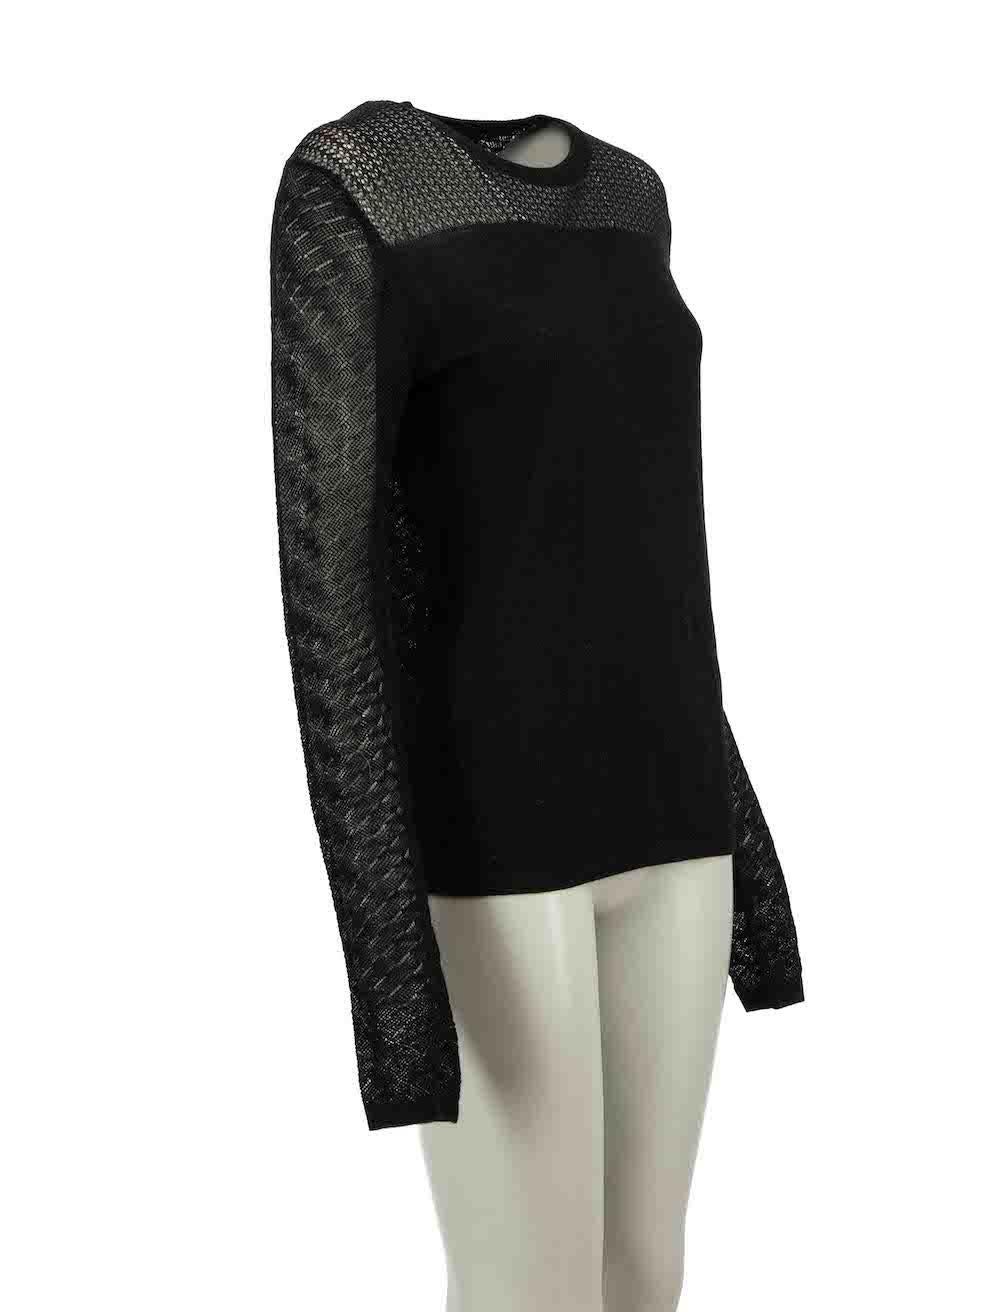 CONDITION is Good. Minor wear to knitwear is evident. Light wear to composition with single pluck to the weave found at centre front on this used Proenza Schouler designer resale item.

Details
Black
Cotton
Knitted jumper
Round neckline
Loose